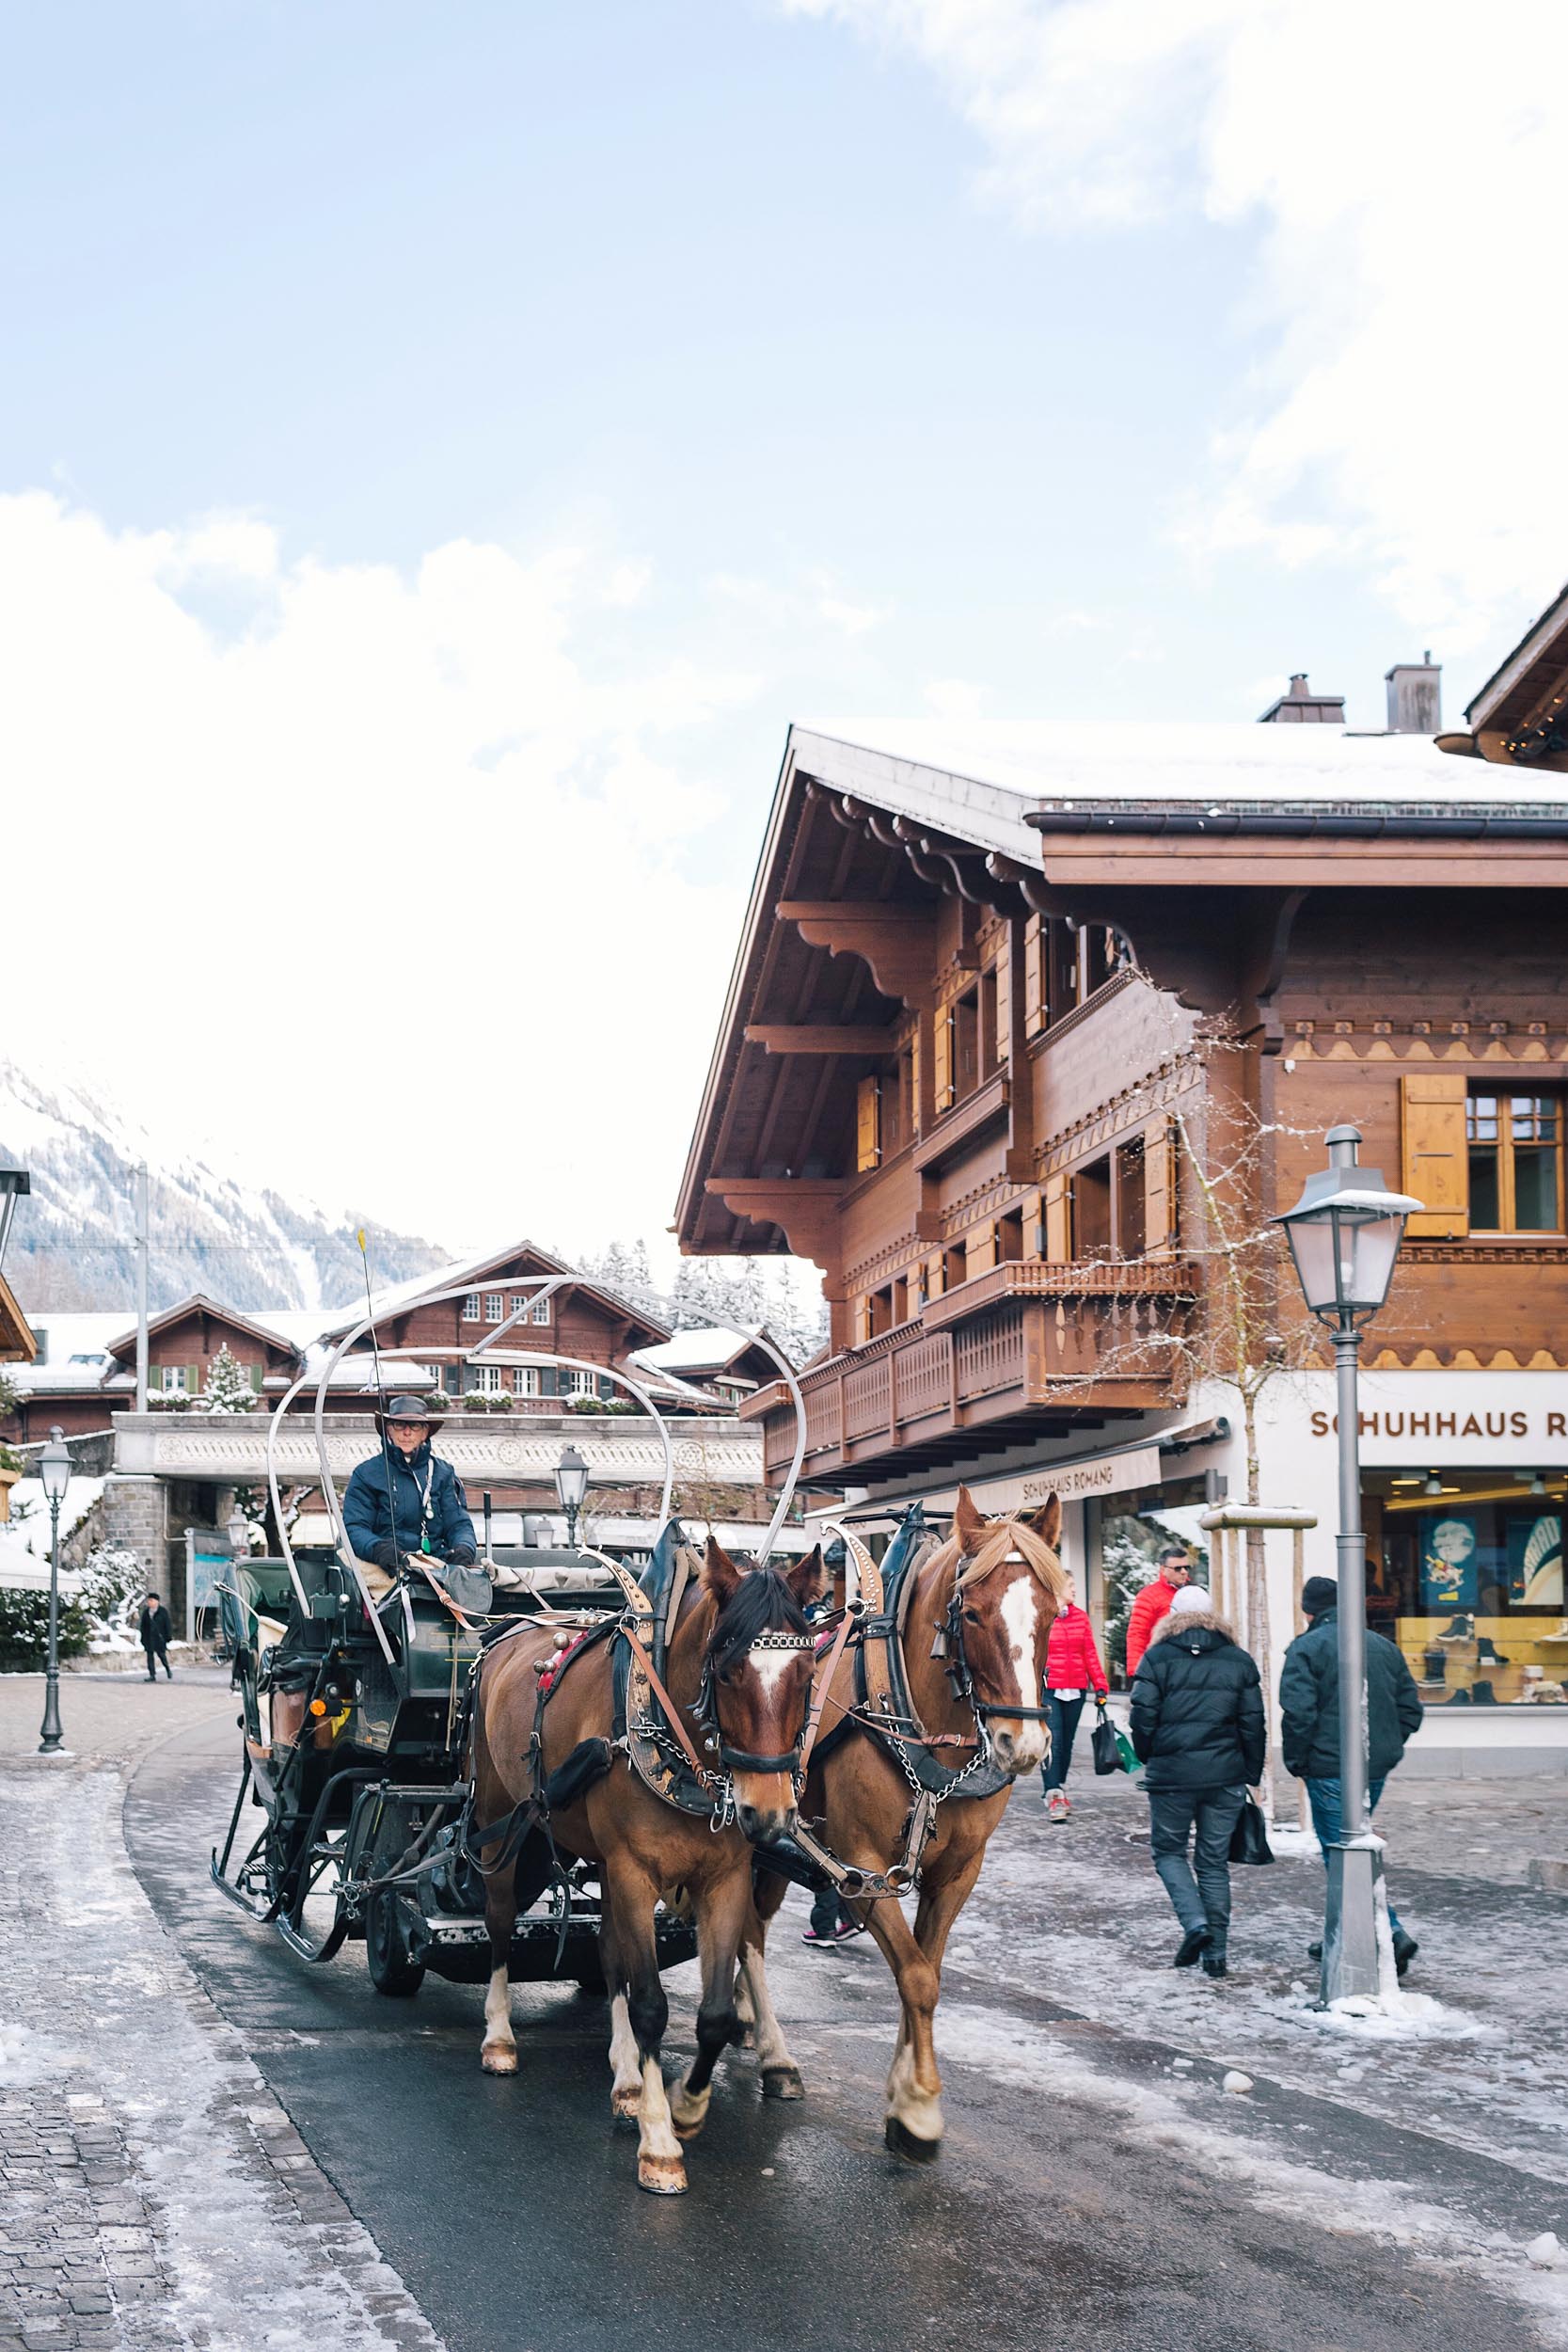 While there’s a long list of things to do in Gstaad (more on that soon), the most unique is likely the Fondueland experience!